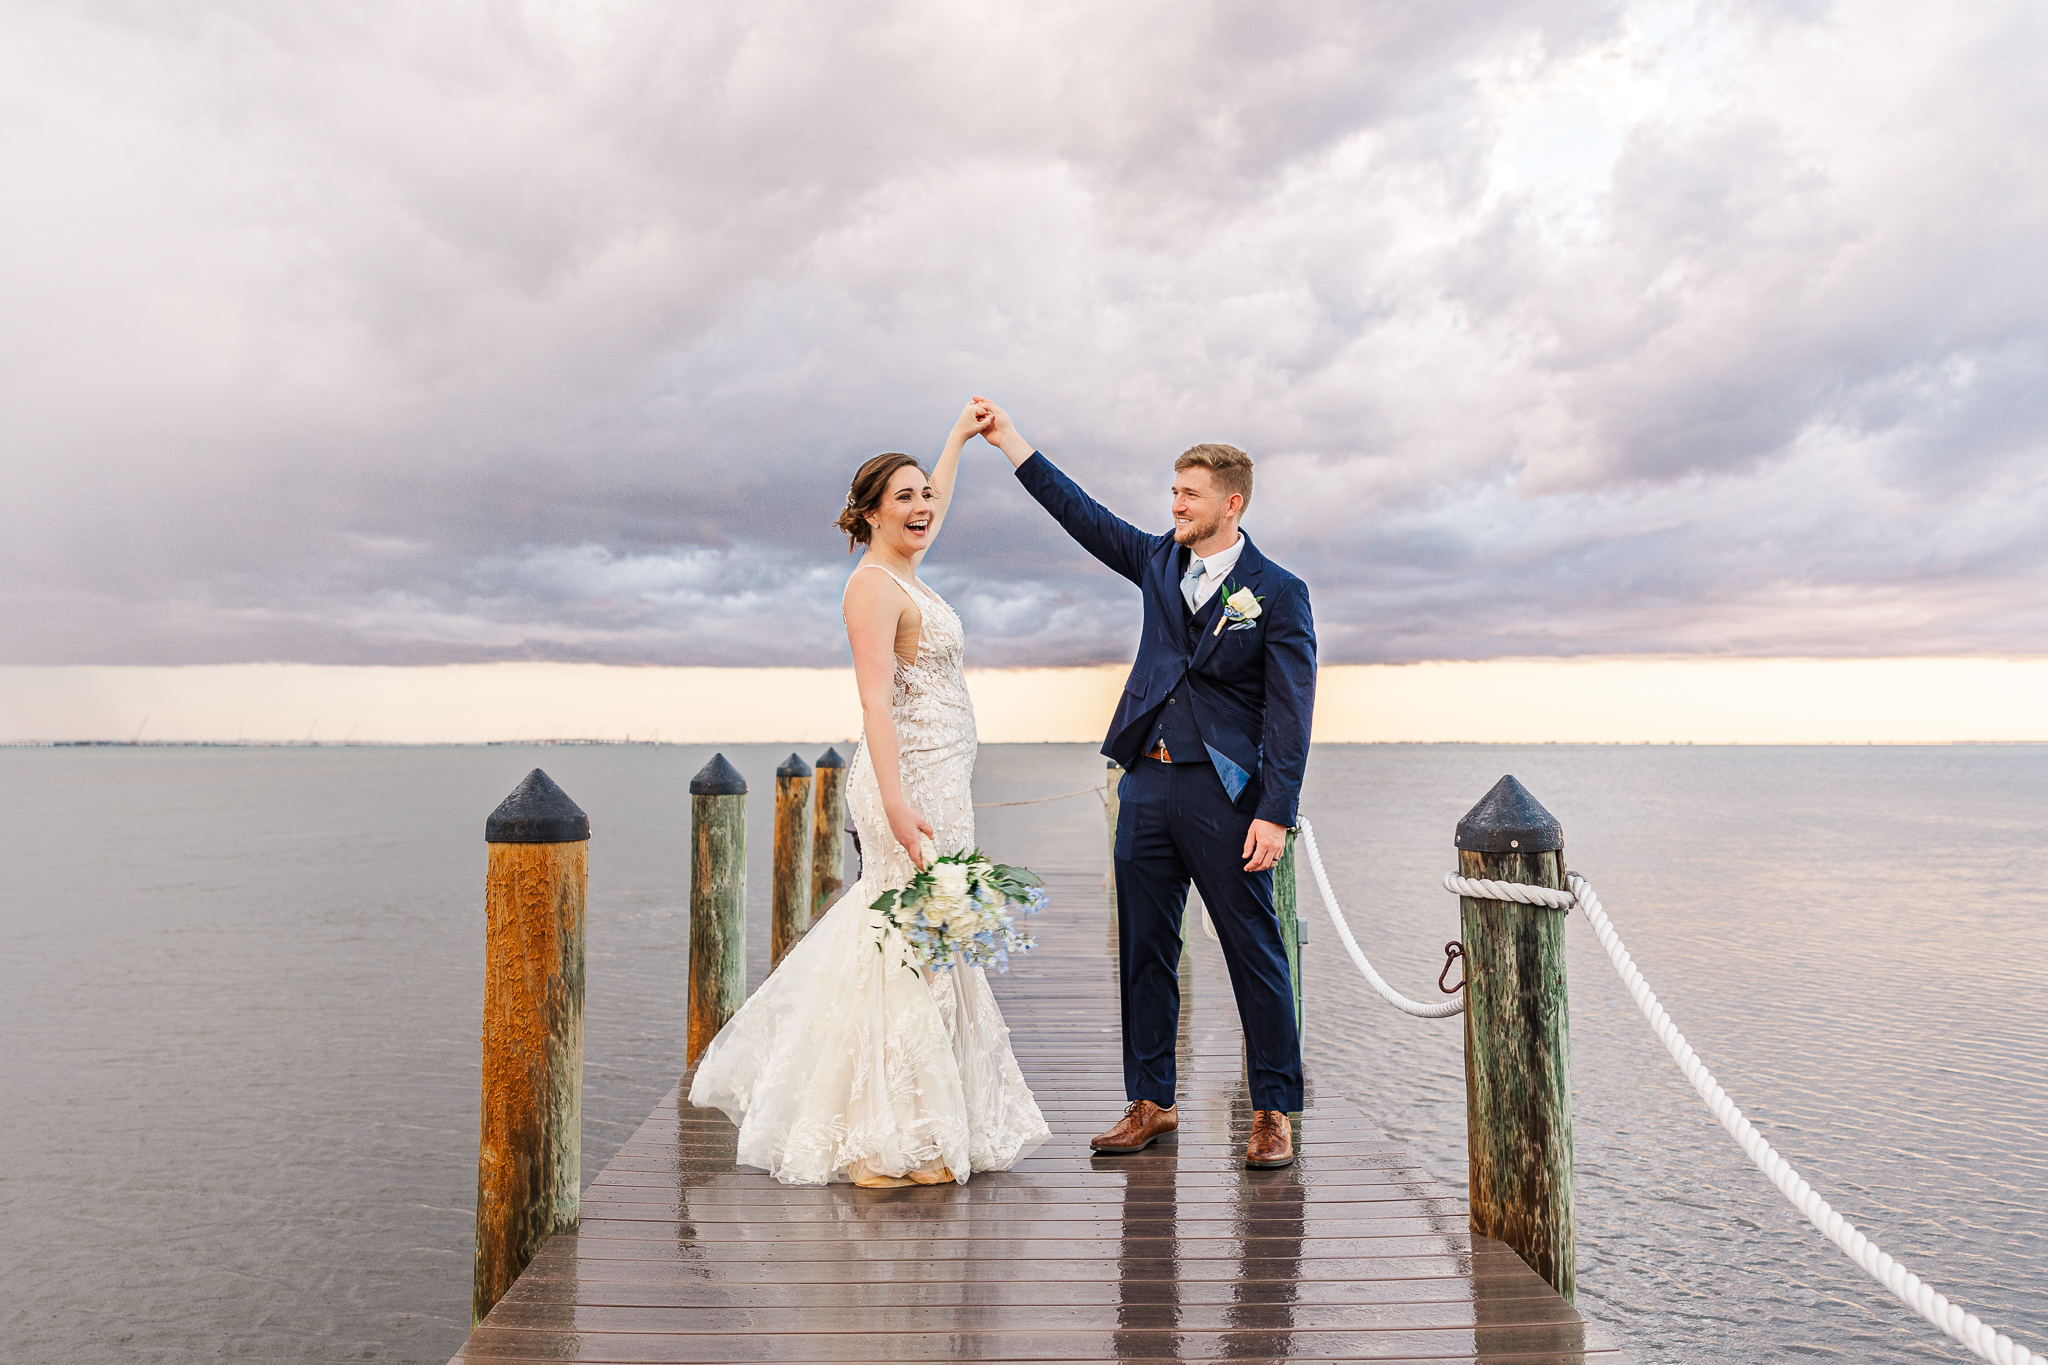 A bride and groom dance at the end of a boat dock